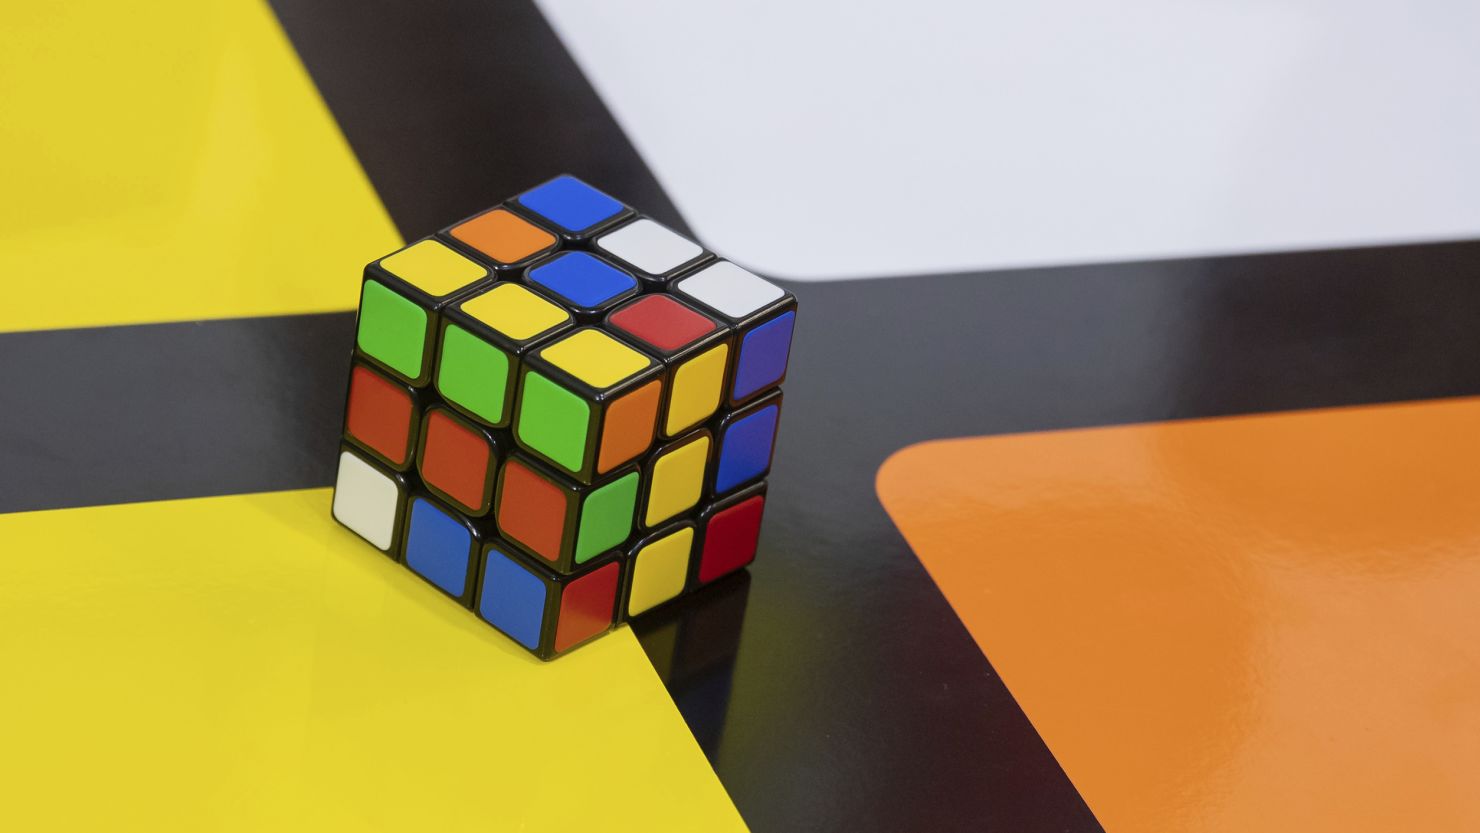 Erno Rubik invented what we now know as the Rubik's Cube in 1974, though it was first released as the Magic Cube, according to the puzzle company's website.